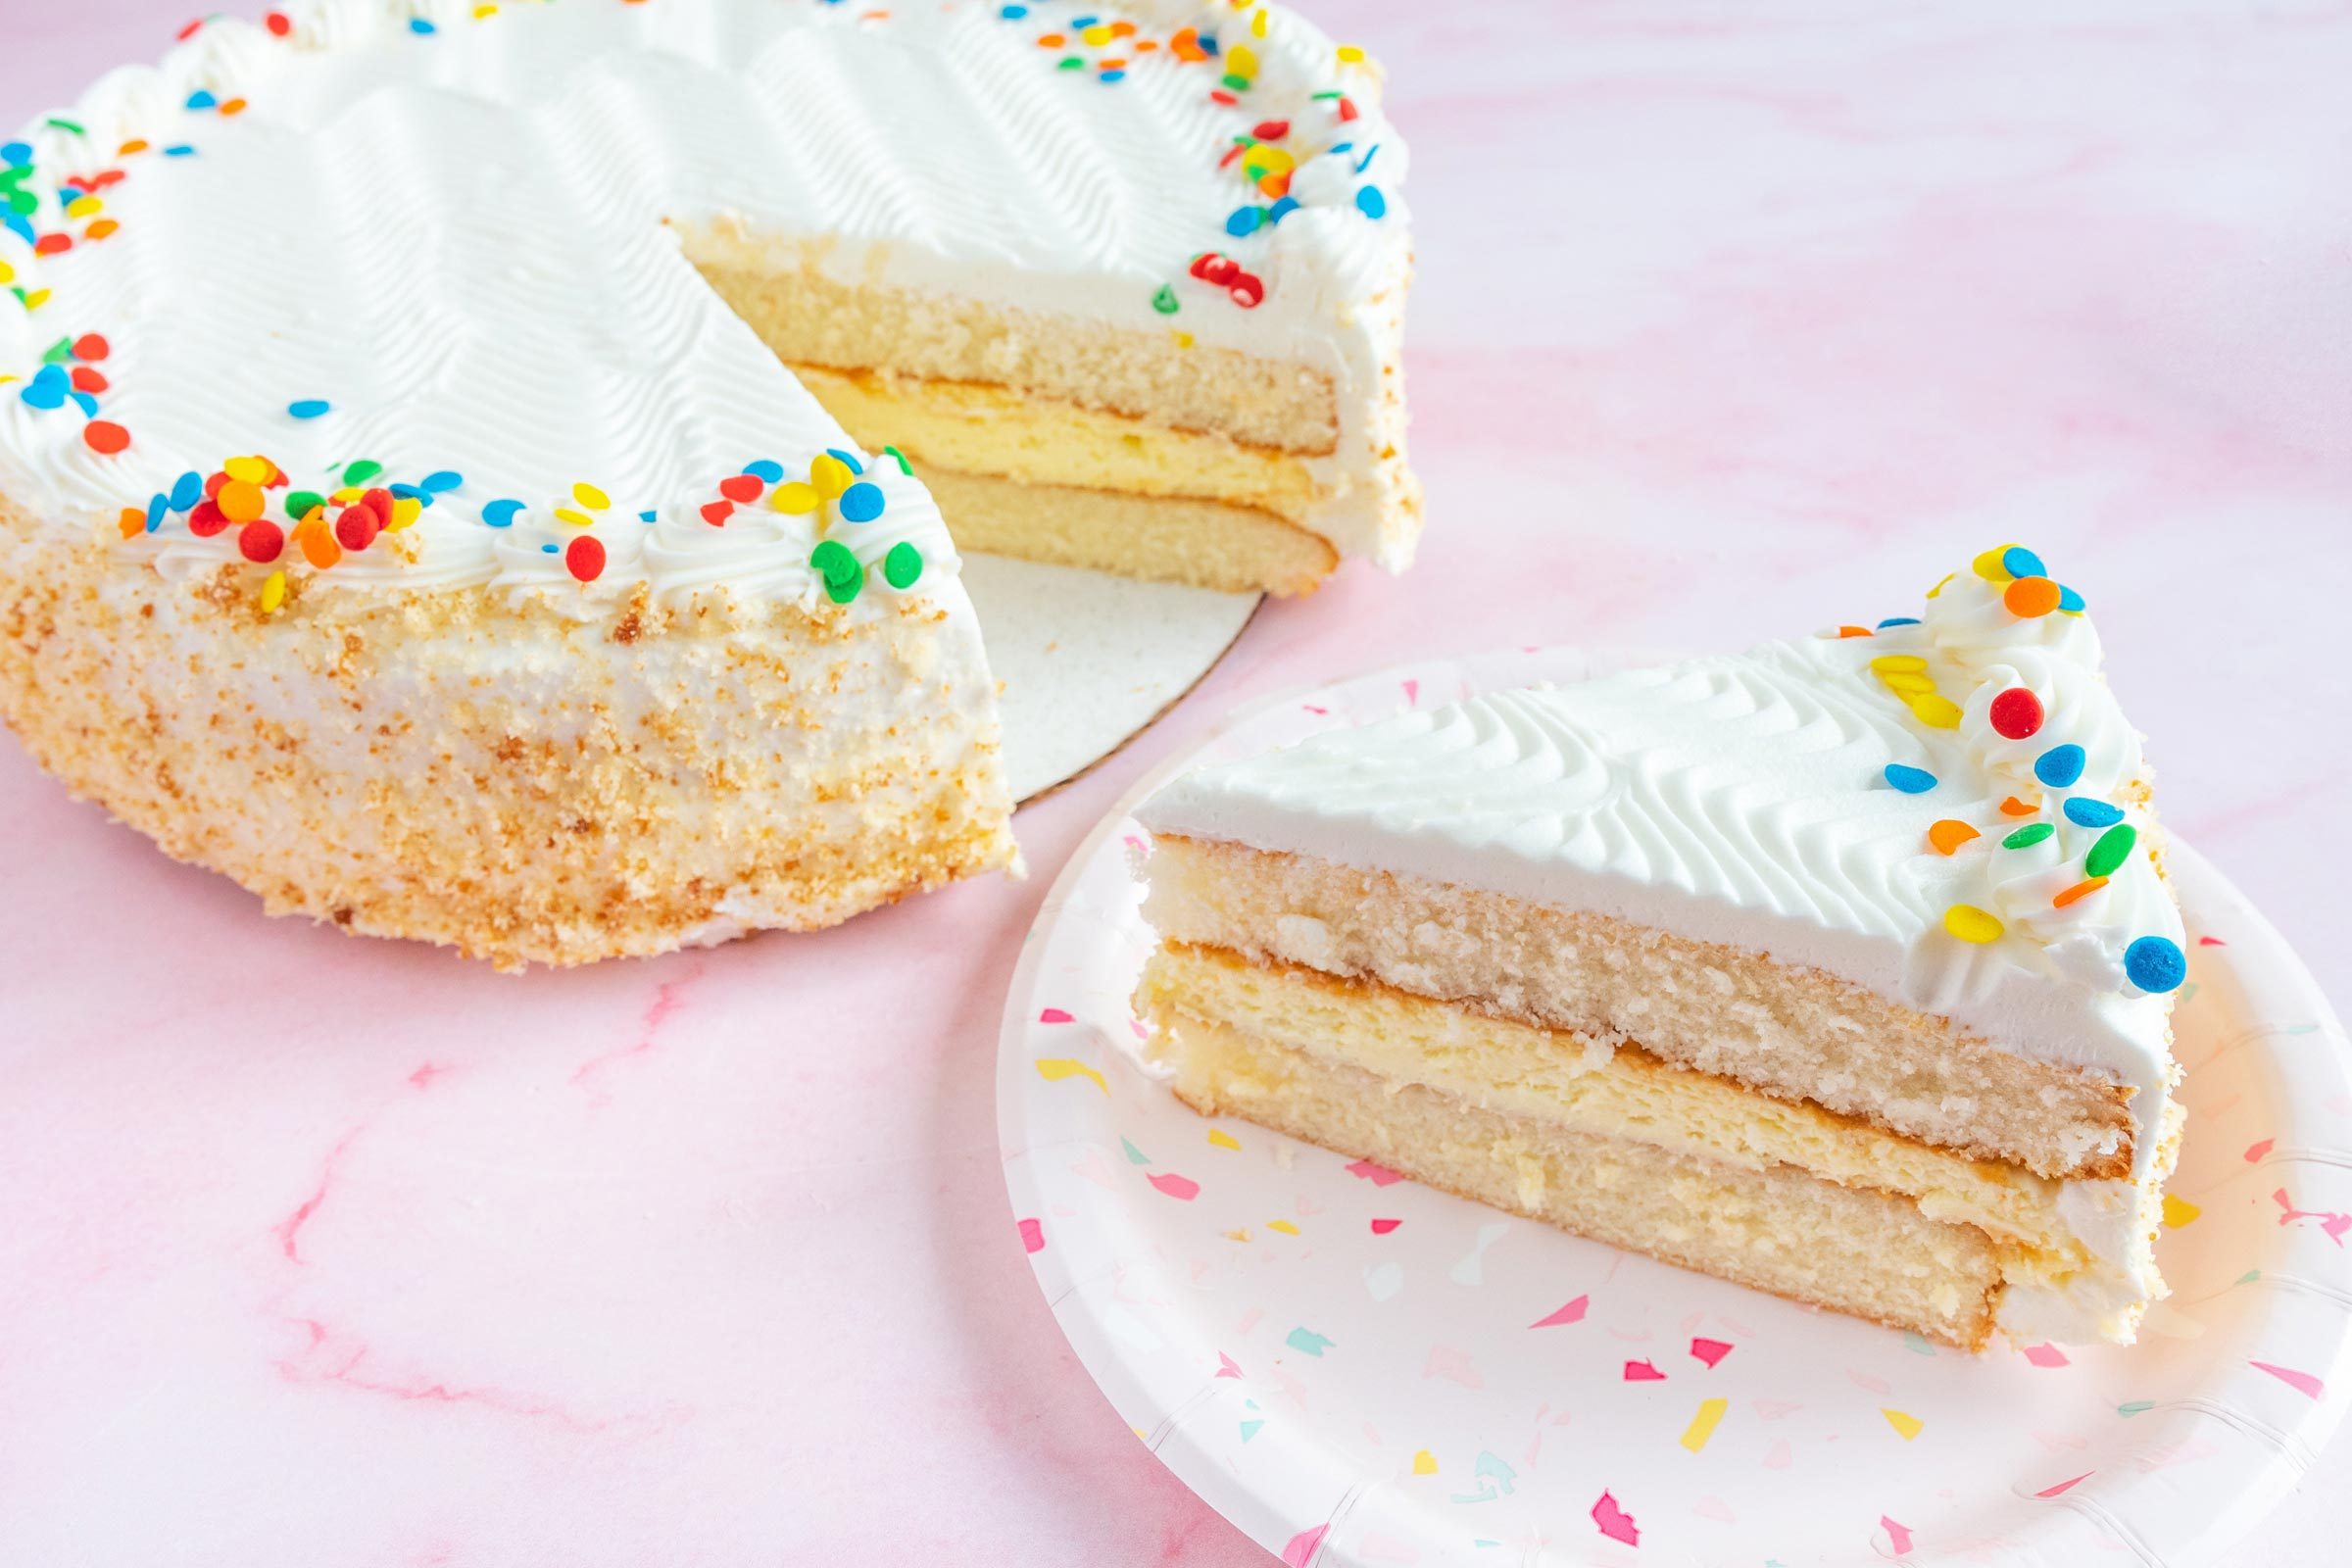 Best Stores For Baking Supplies, According To Bakers